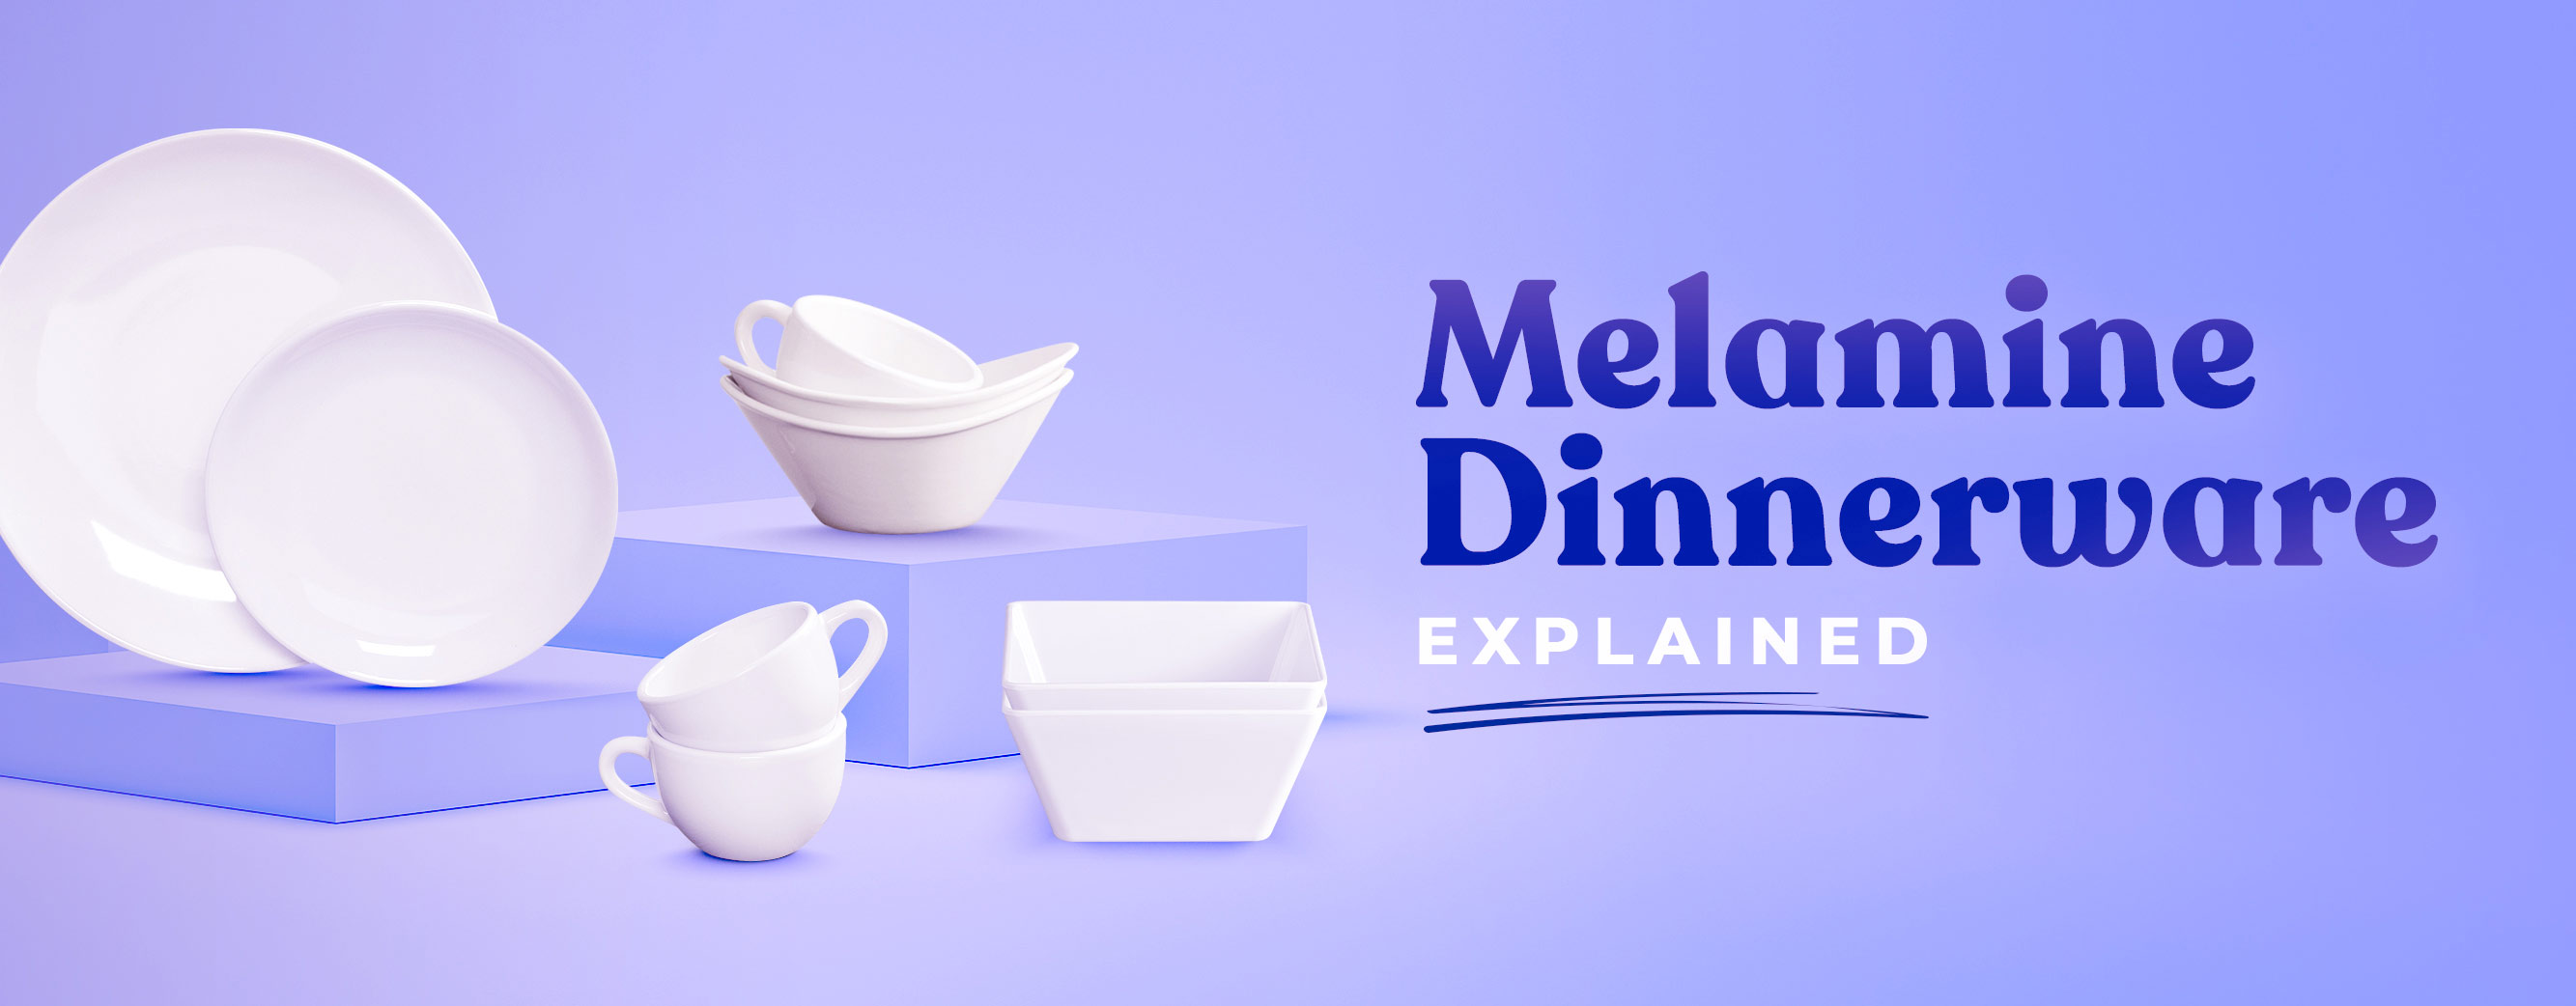 Everything You Need to Know About Melamine Dinnerware